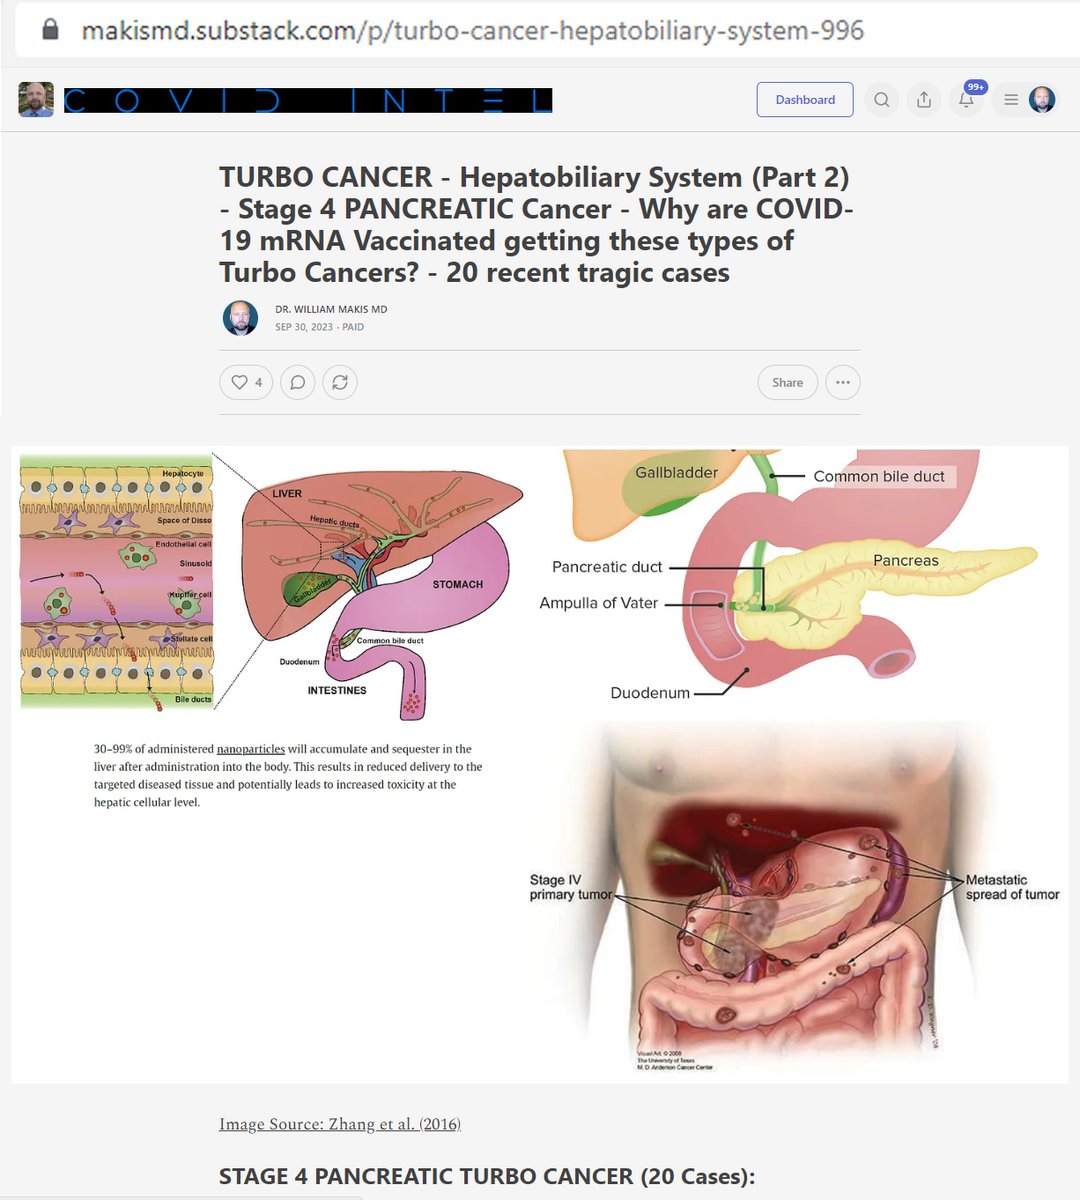 NEW ARTICLE: TURBO CANCER - Stage 4 PANCREATIC CANCER - Why are COVID-19 mRNA Vaccinated getting these types of Cancers? 

There is a Tsunami of Stage 4 Pancreatic Cancers being diagnosed RIGHT NOW in mRNA Vaccinated people in their 30s, 40s, 50s:

Sep.21, 2023 - Cedar Rapids, IA